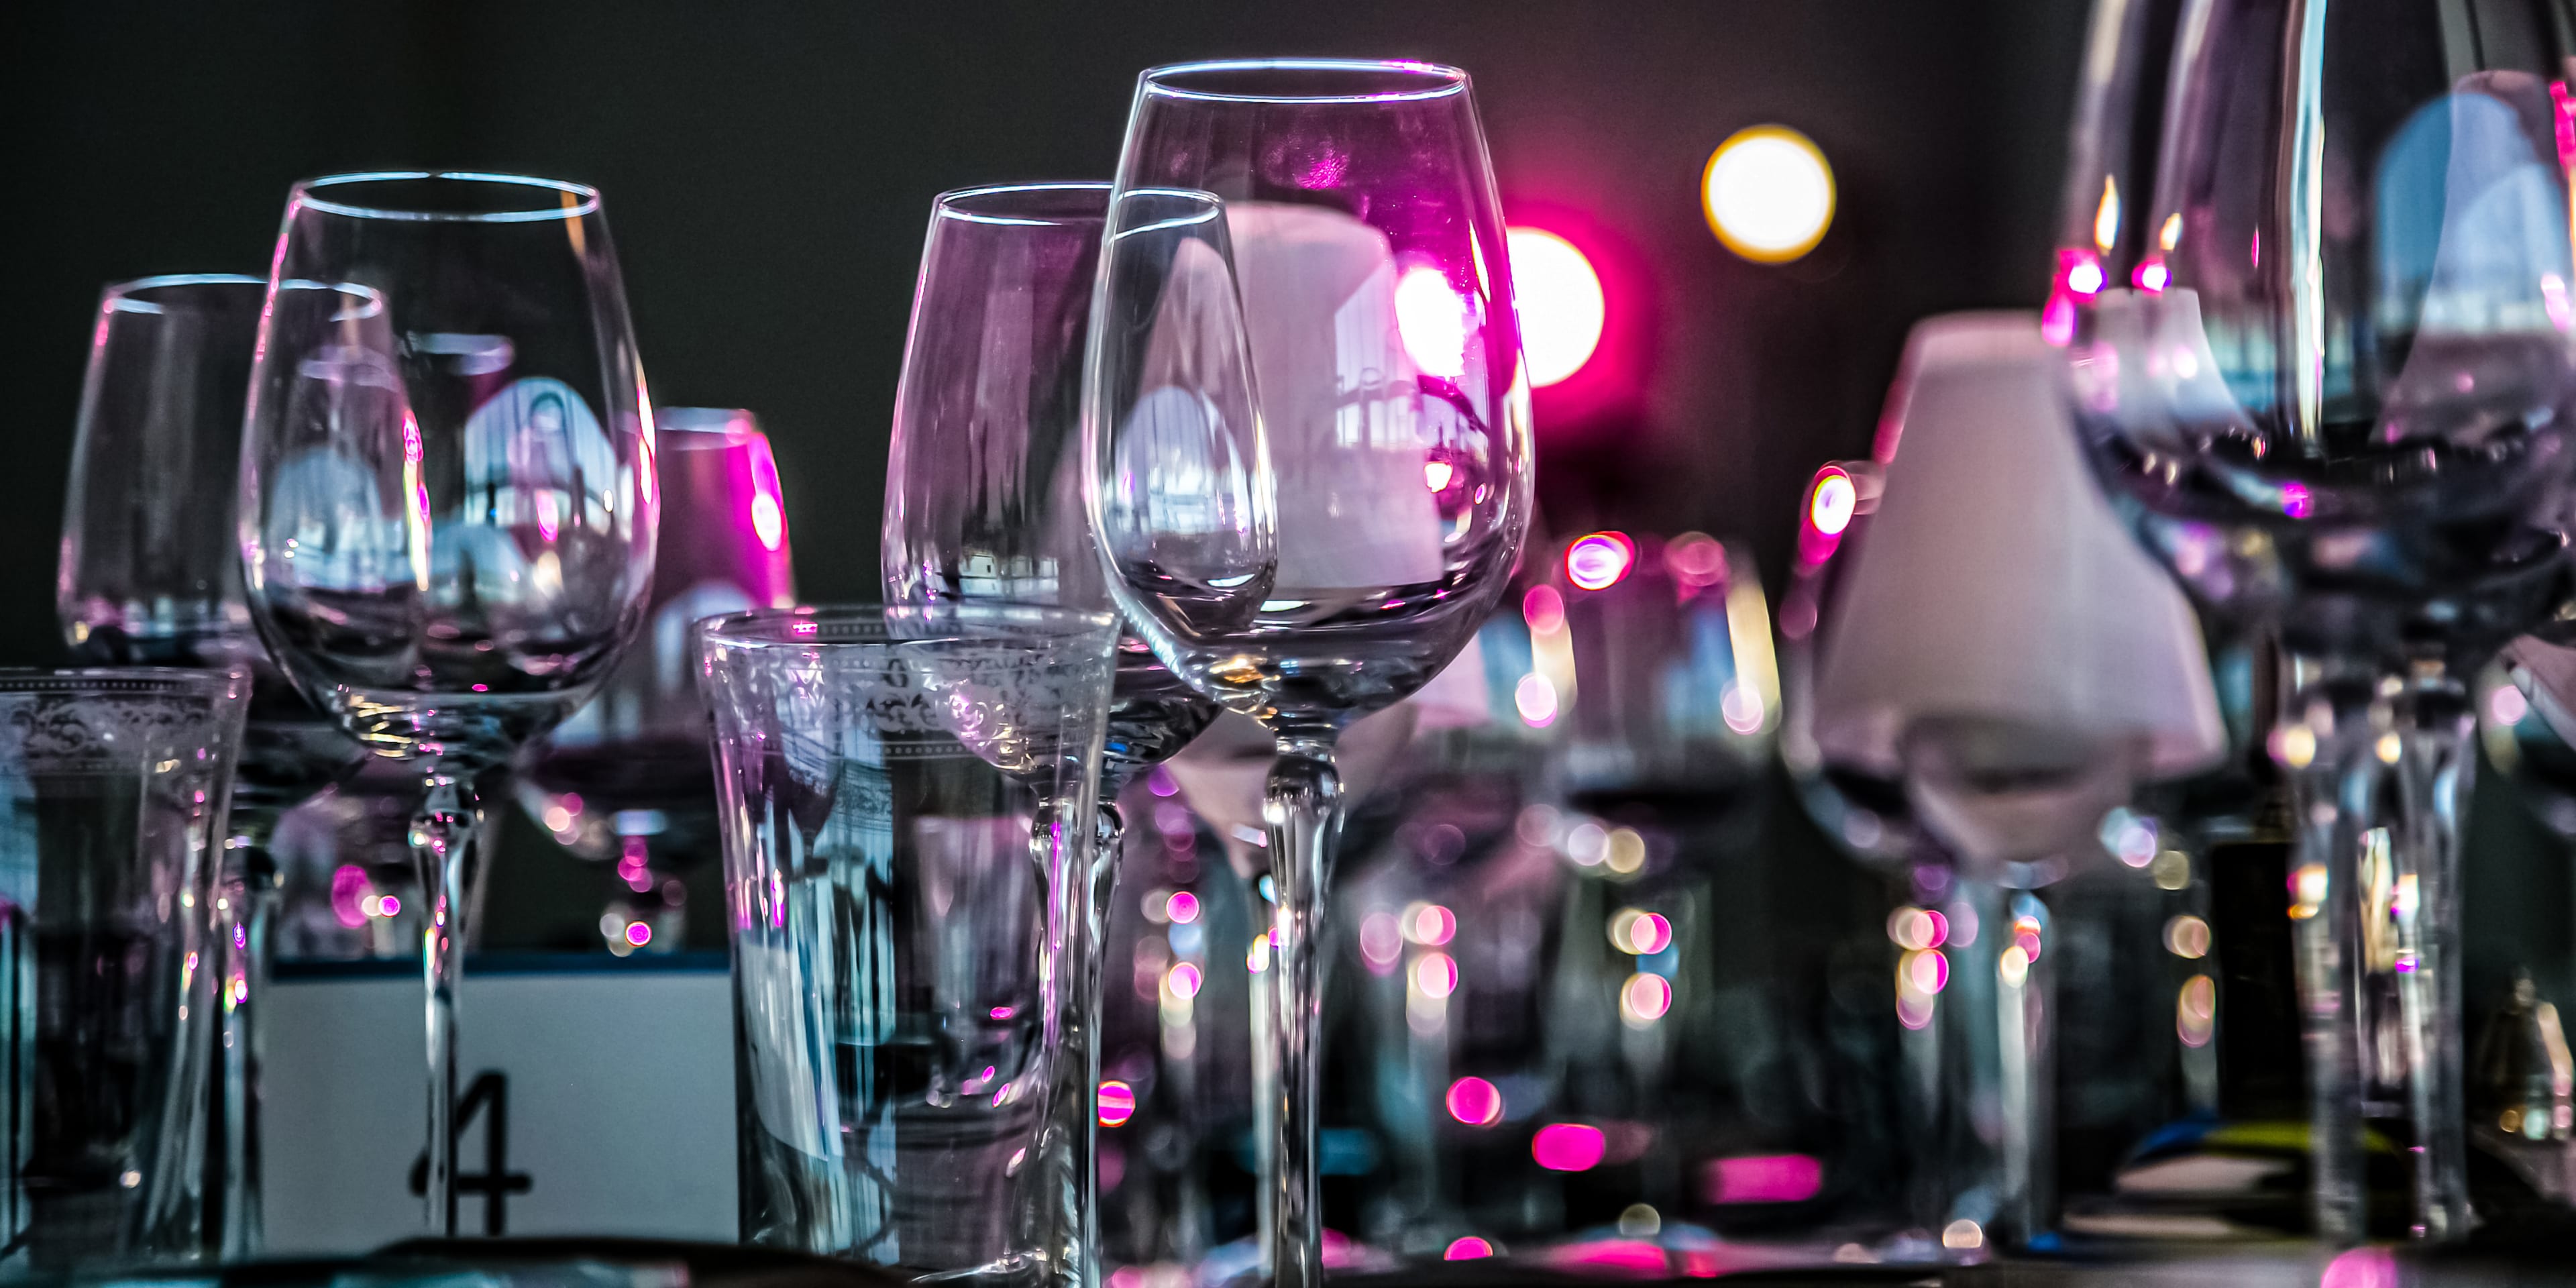 Wine glasses set on a table at a gala.